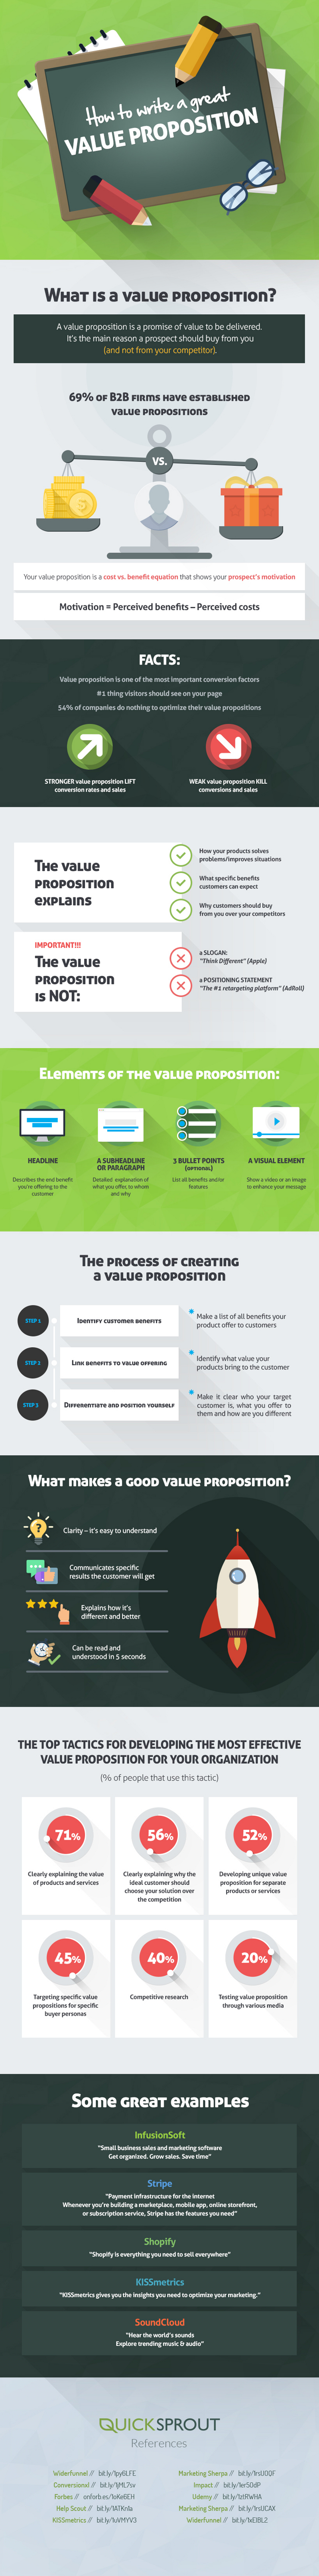 How to Craft a Winning Value Proposition